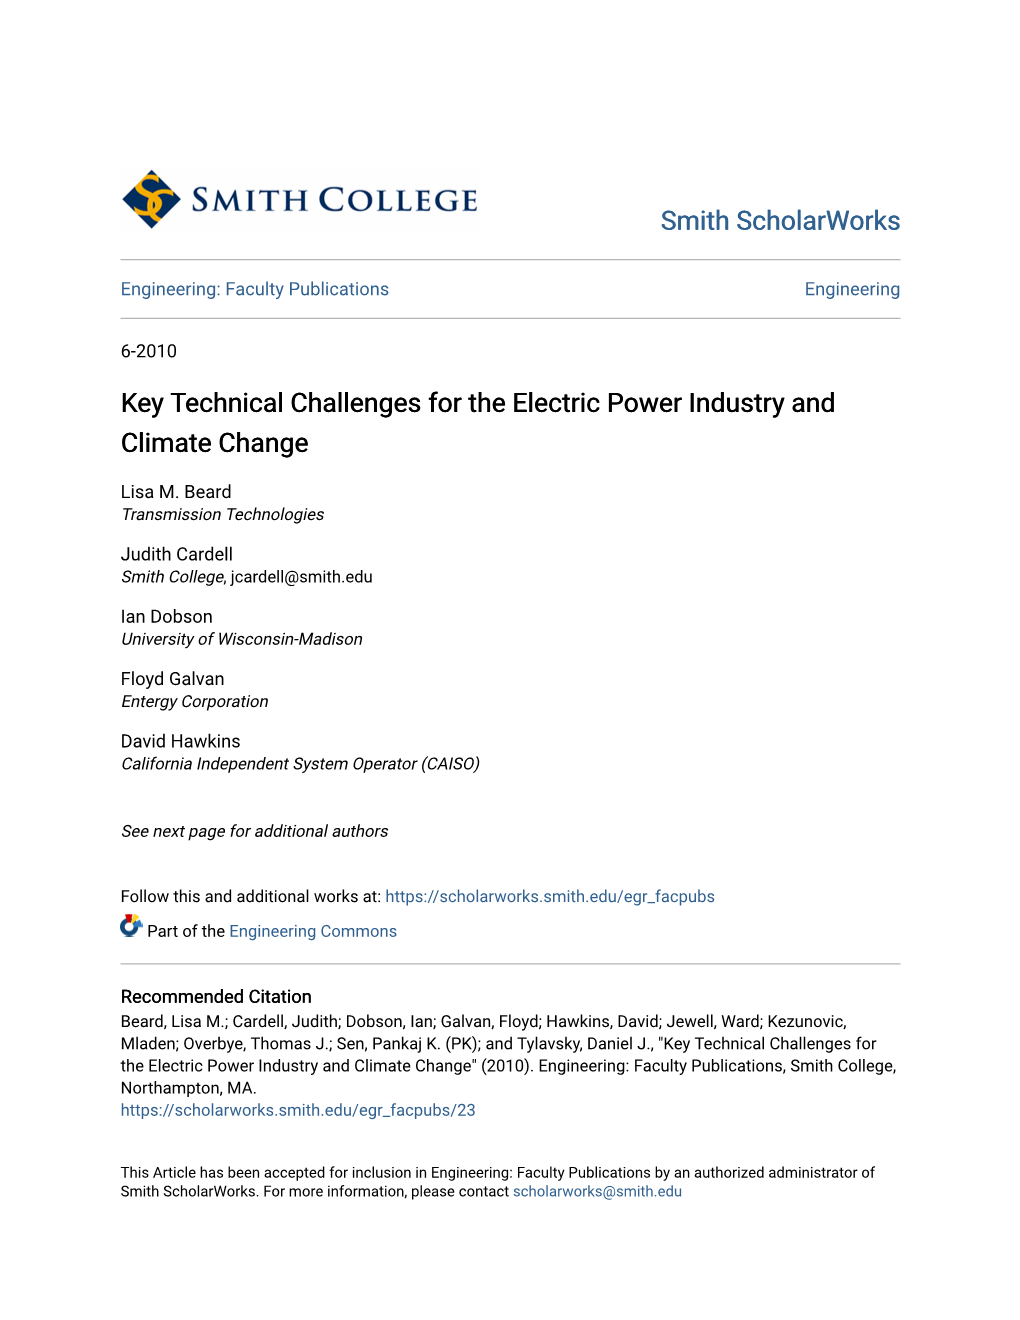 Key Technical Challenges for the Electric Power Industry and Climate Change